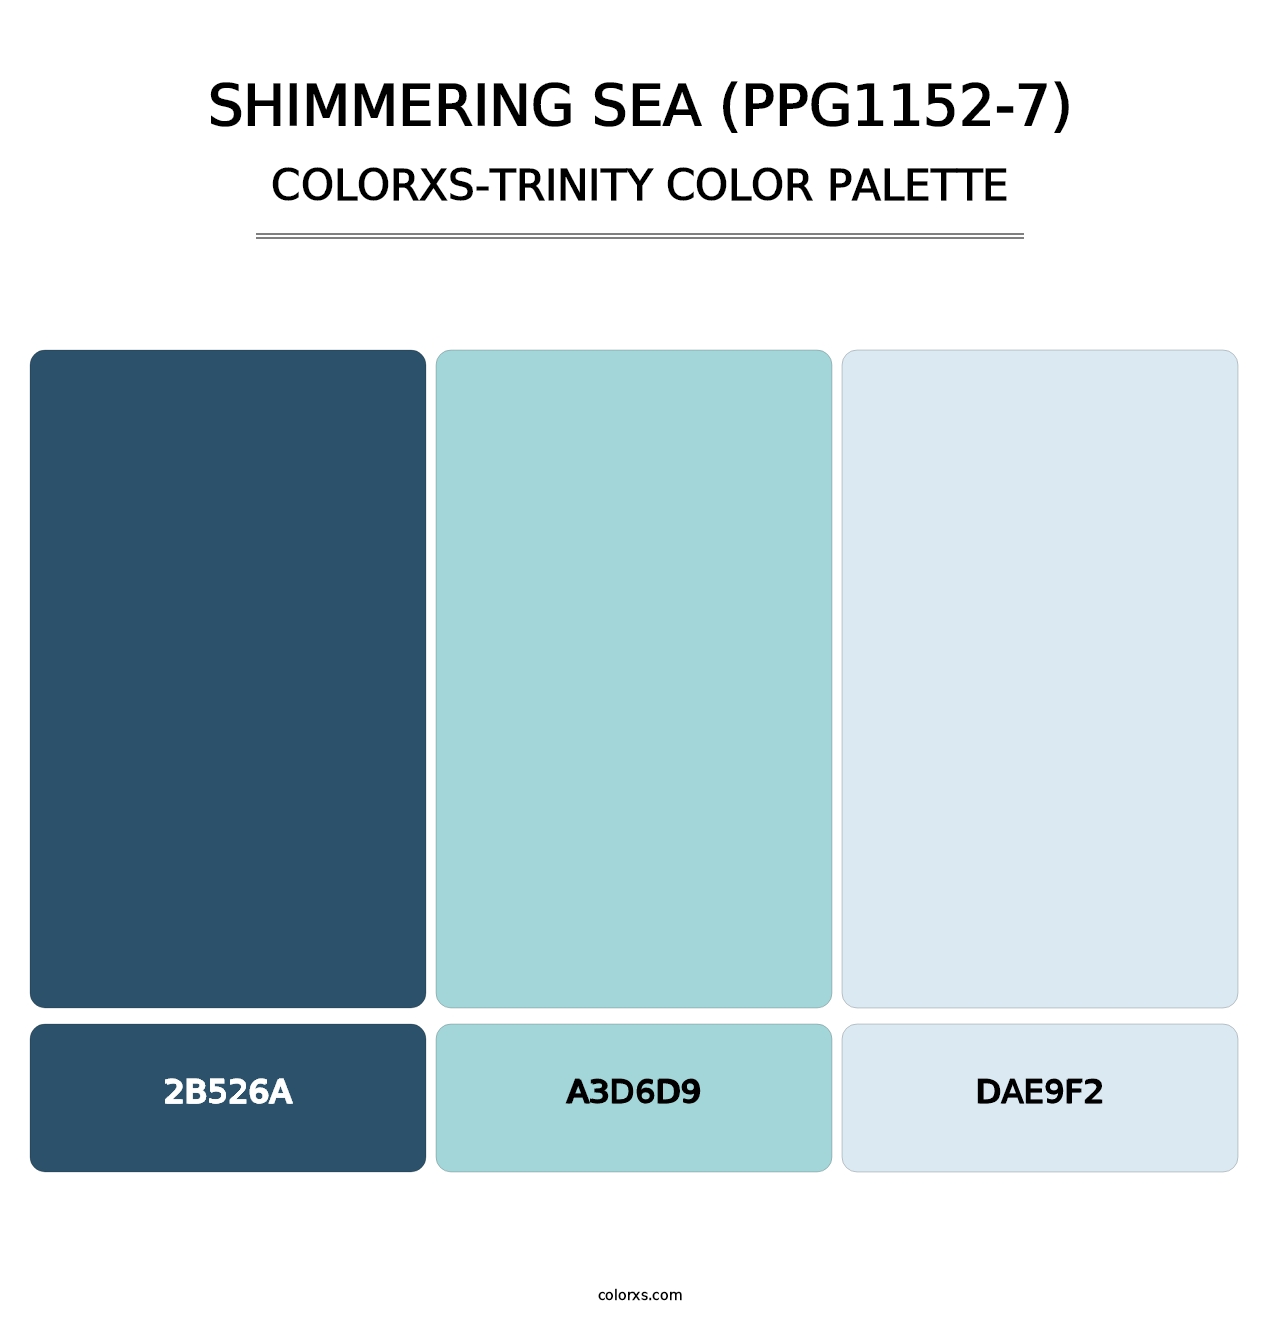 Shimmering Sea (PPG1152-7) - Colorxs Trinity Palette